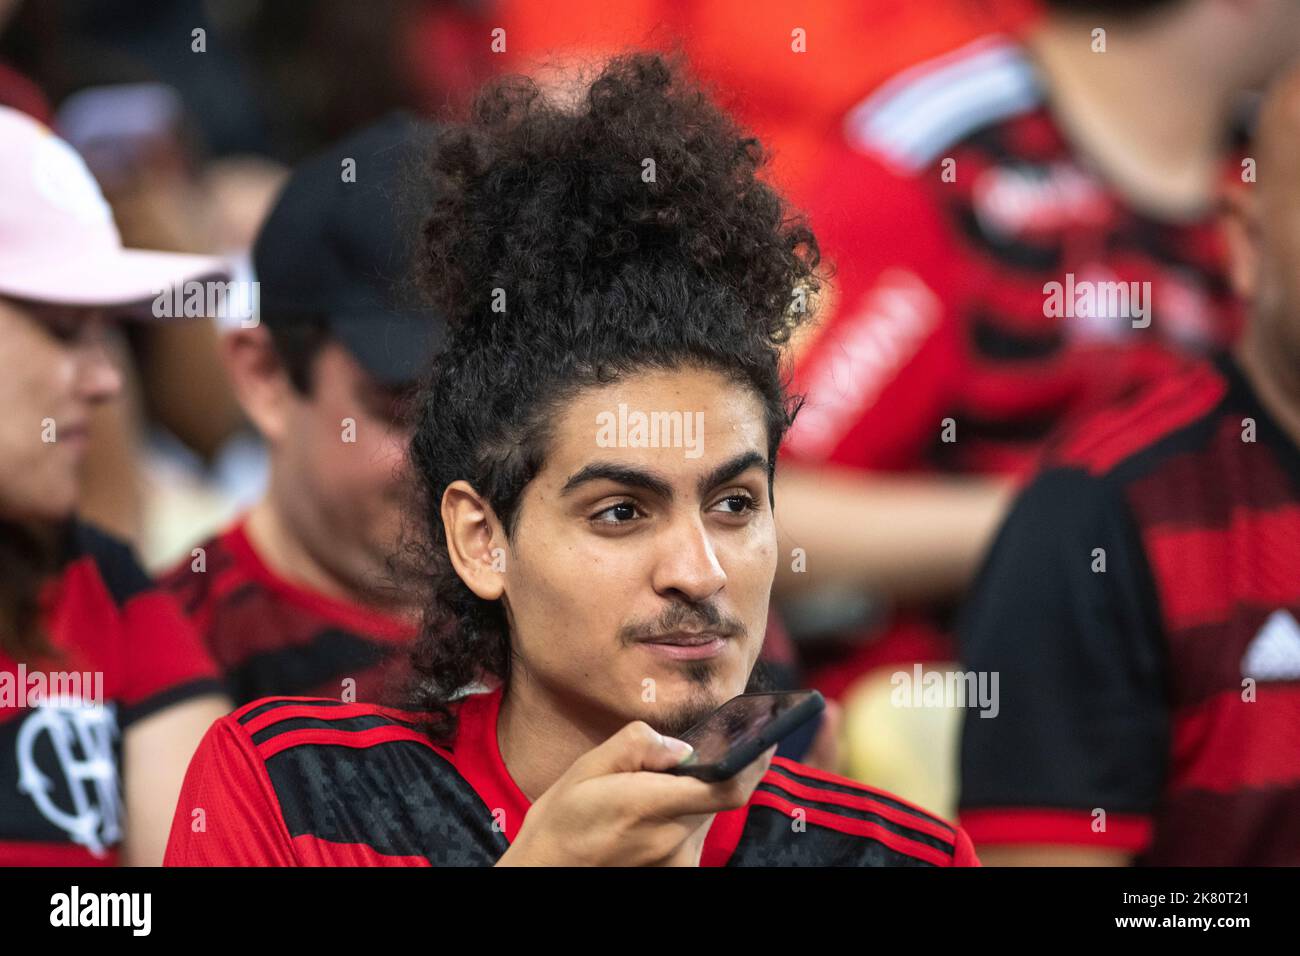 Rio, Brazil - October 19, 2022: Fans in match between Flamengo vs Corinthians by second match of final round of Brazilian Cup in Maracana Stadium Stock Photo